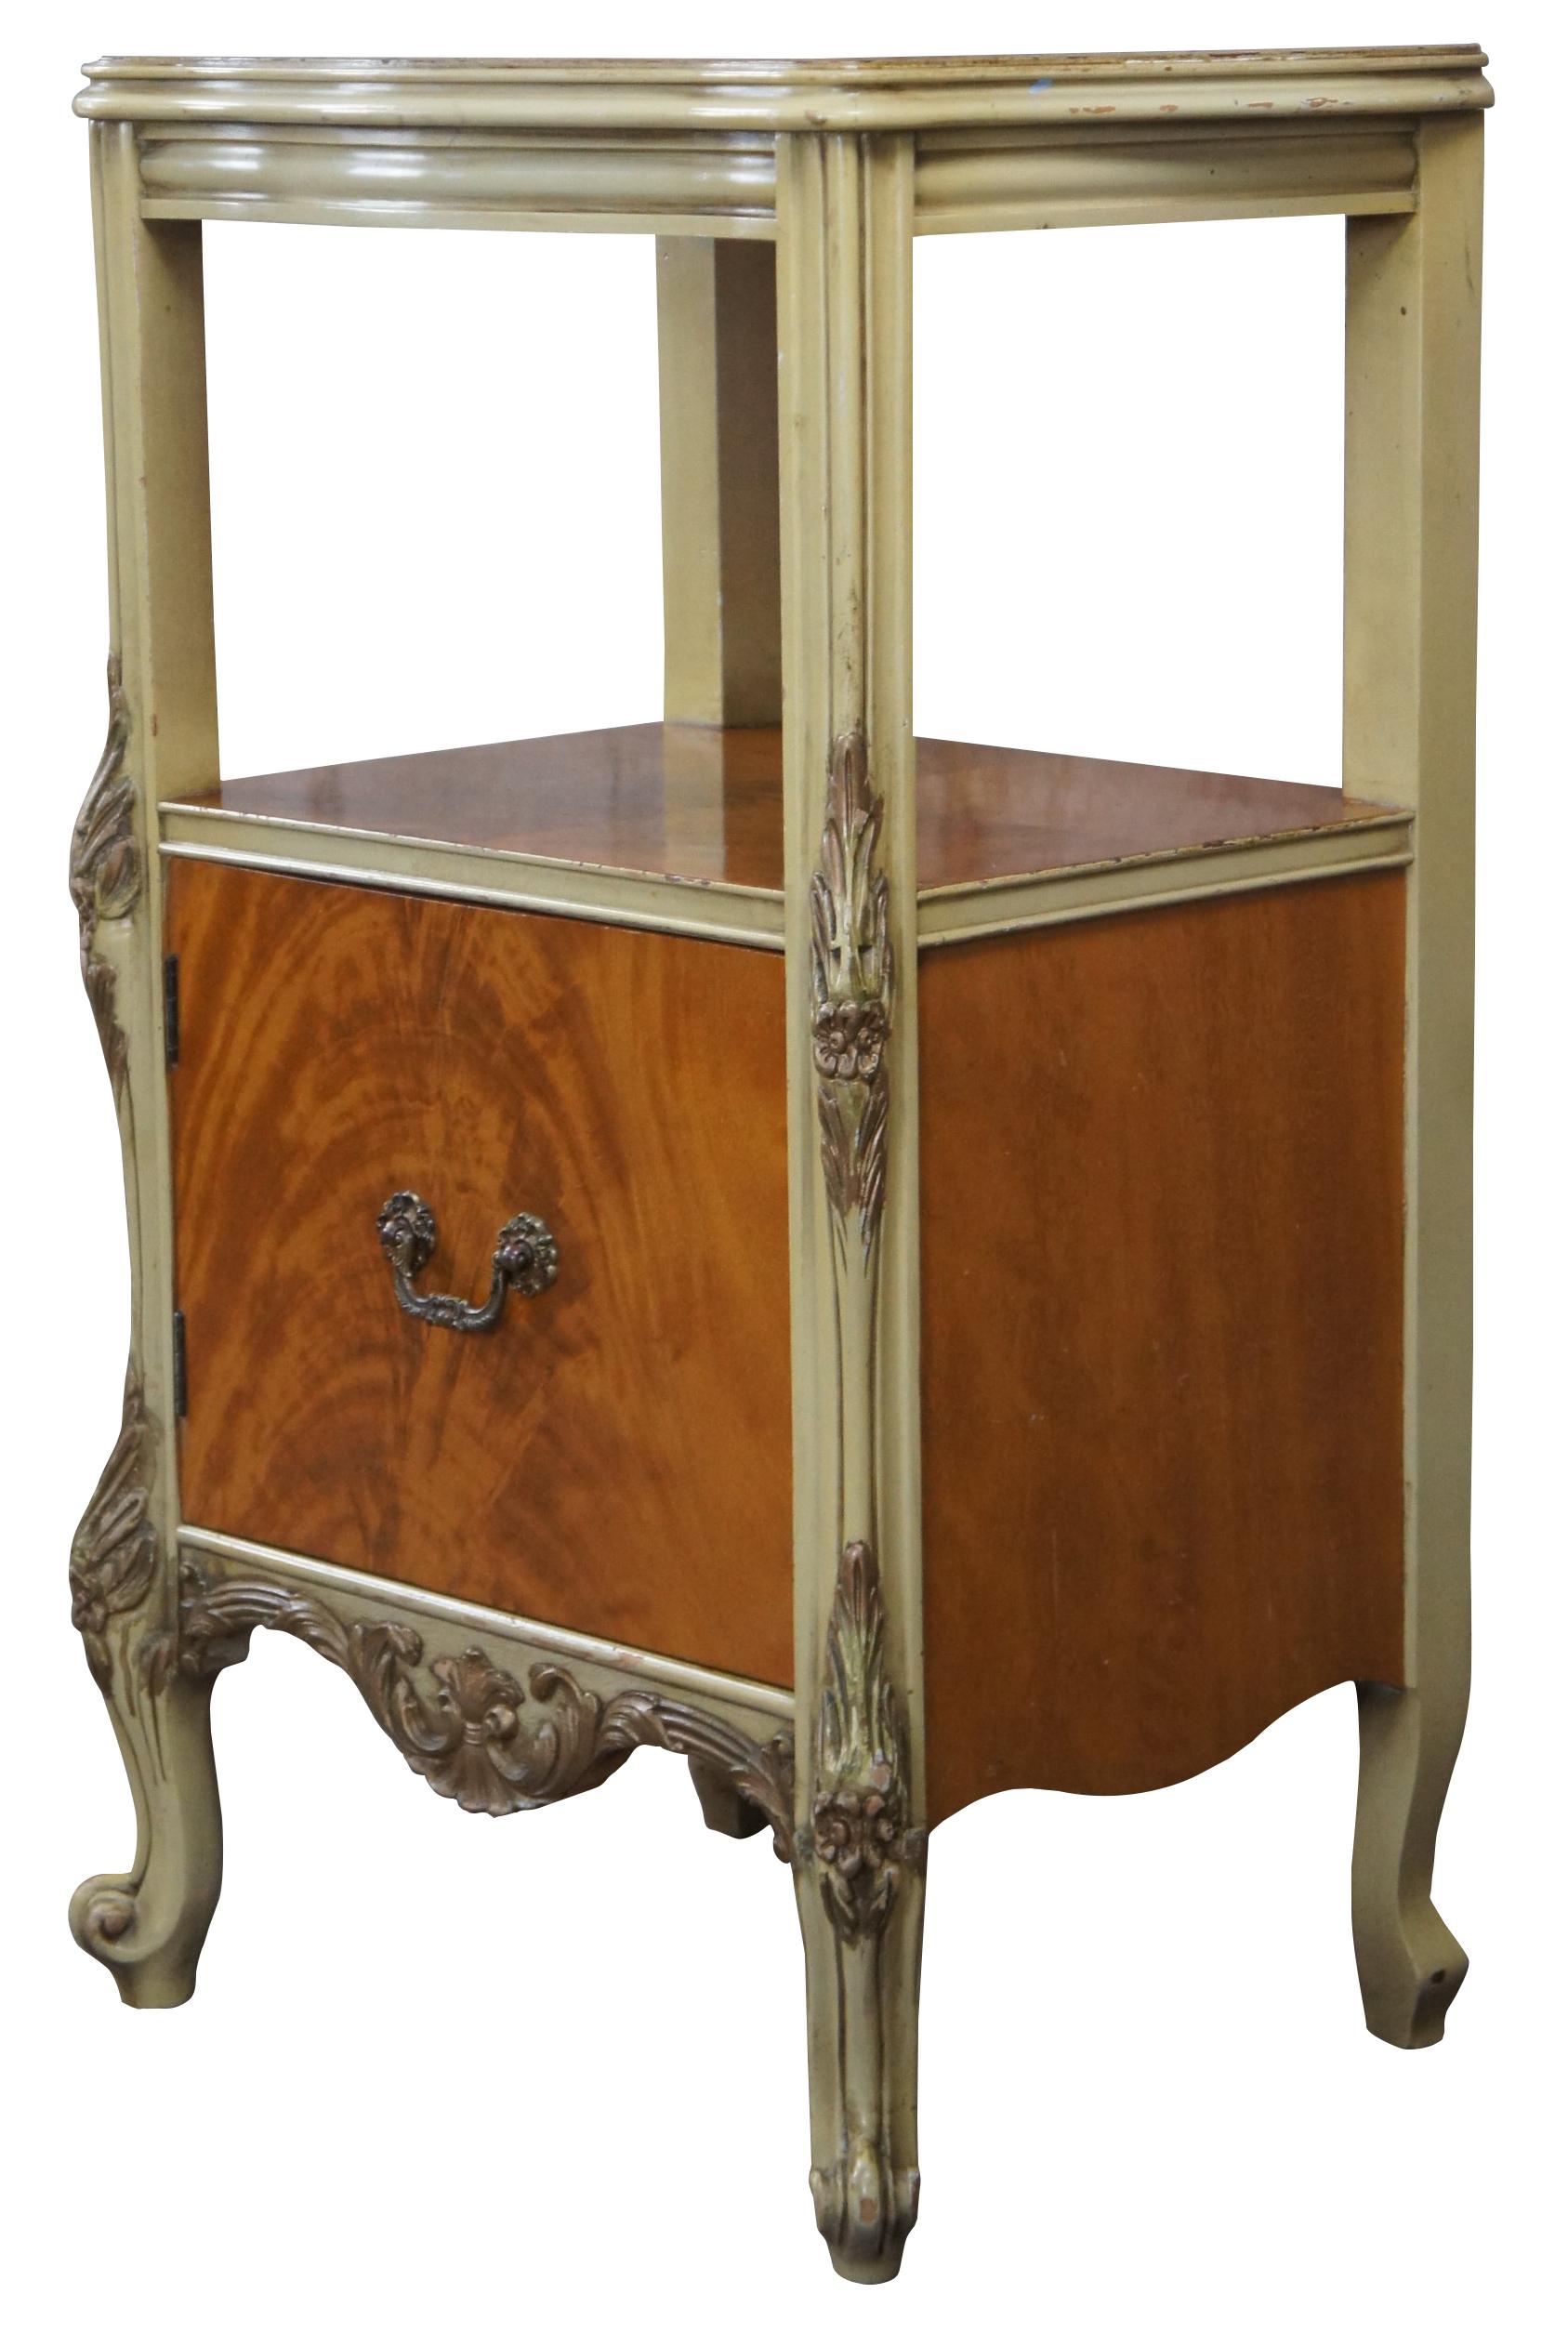 Elegant satinwood nightstand with ornate hand painted gold trim by J.B. Van Sciver Co. A Serpentine form with tiered design allowing for two surfaces for display. Lower Door opens with a cast bronze pull for storage. Made by the J. B. Van Sciver Co.